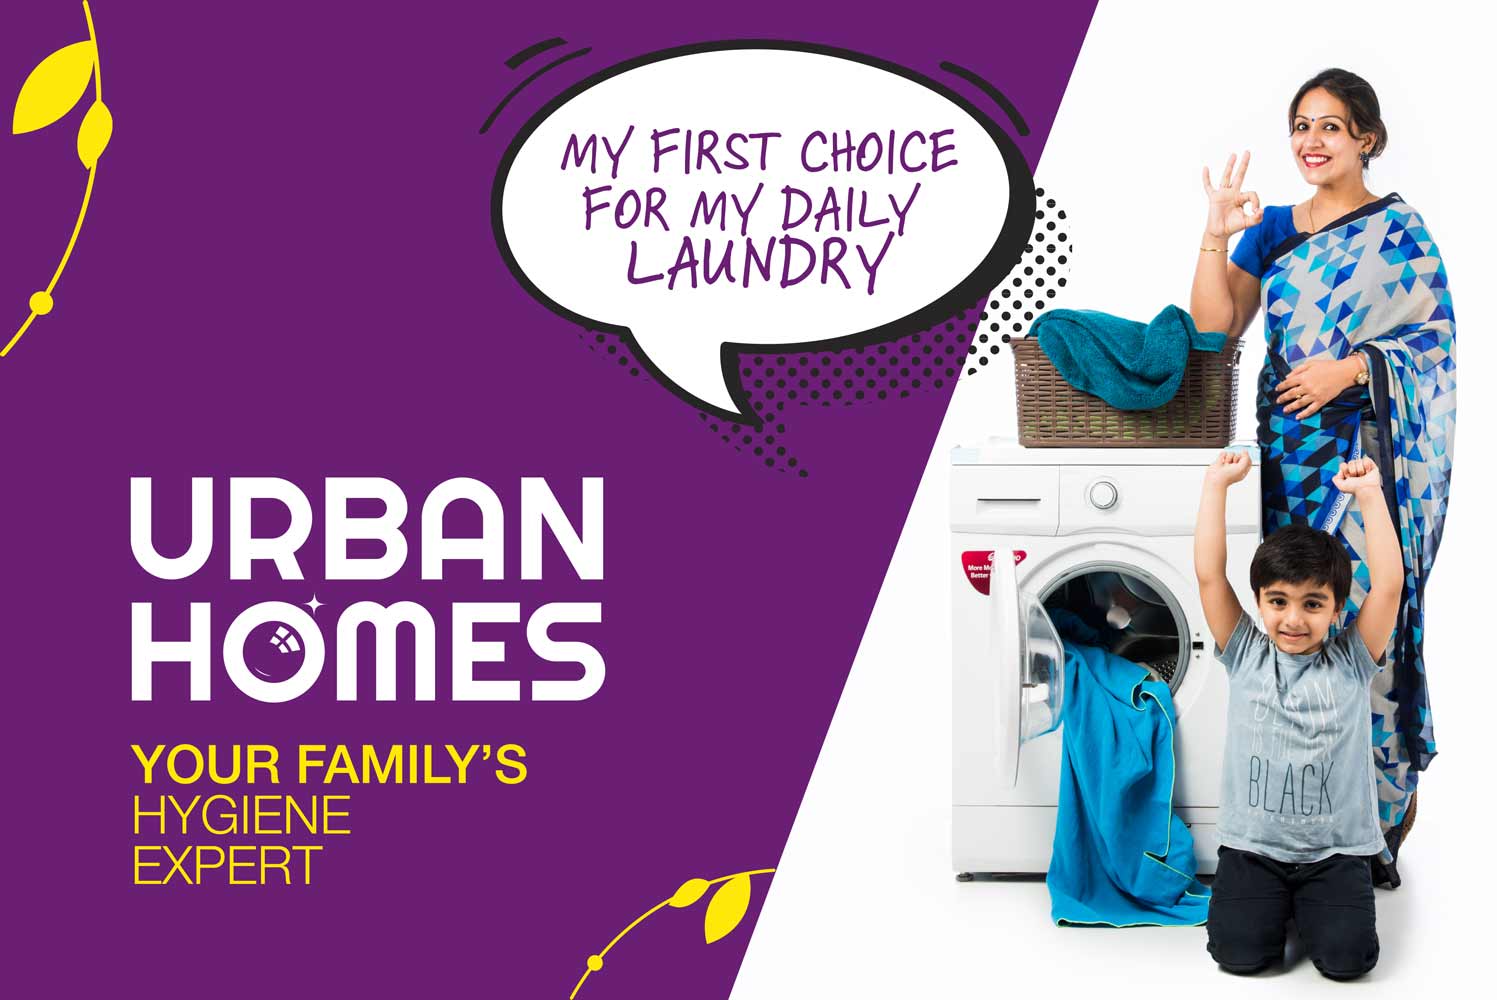 Urban Homes for your daily laundry